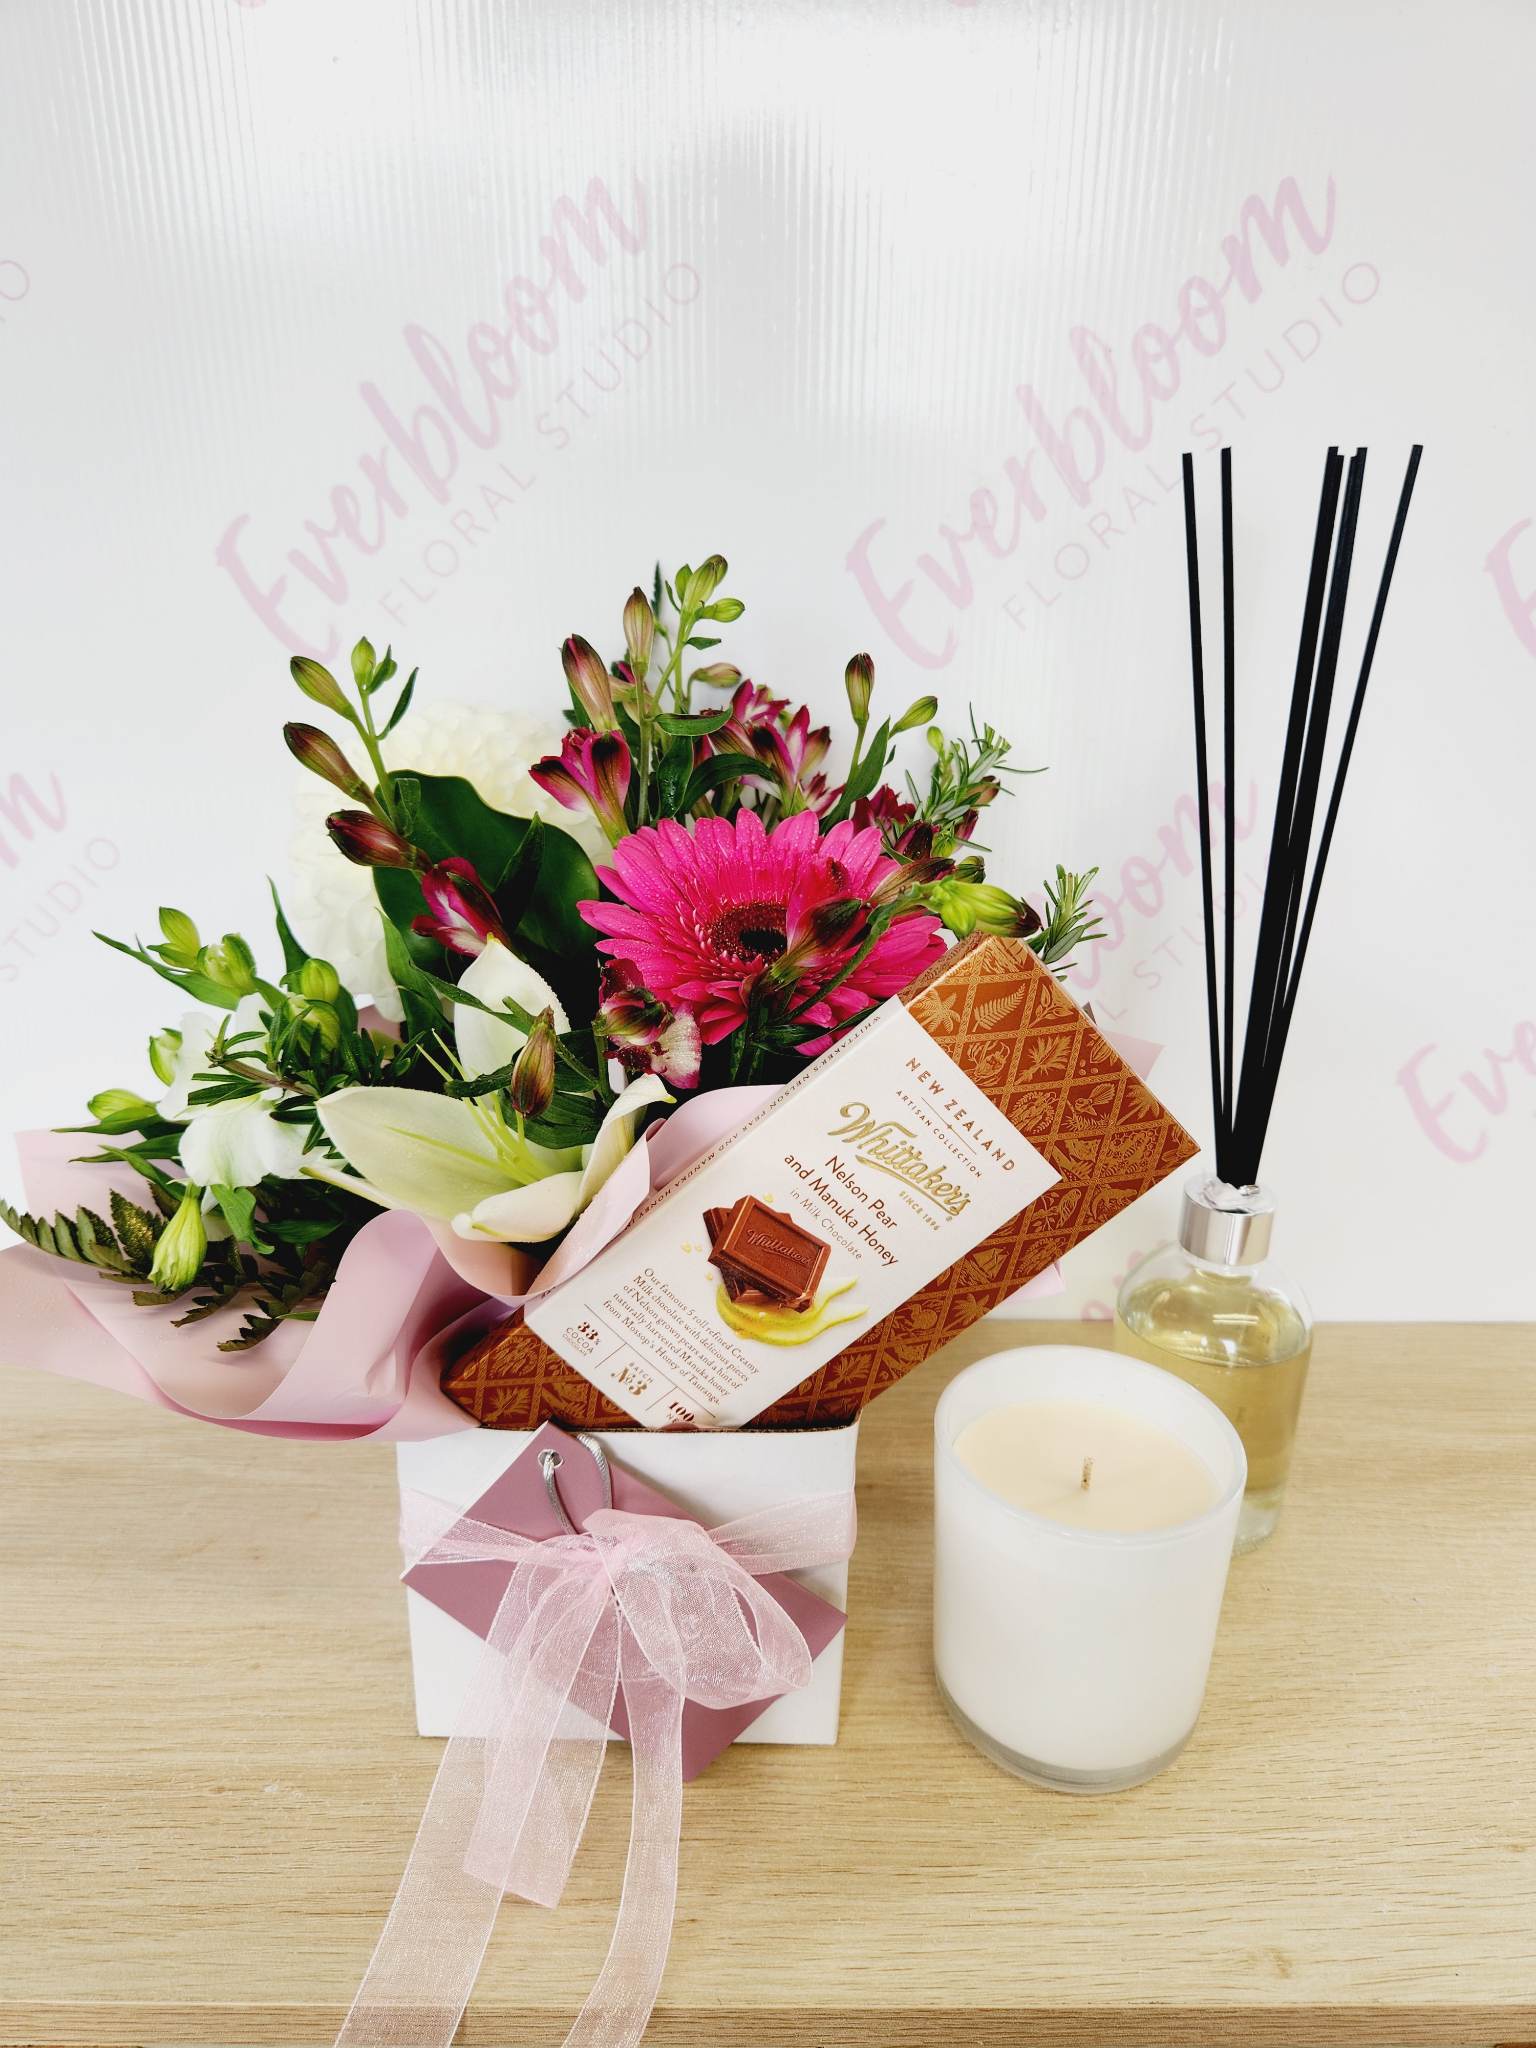 Spoil her gift box, Mothers day gifts - Mount Maunganui and Papamoa Florist. Everbloom Floral studio.